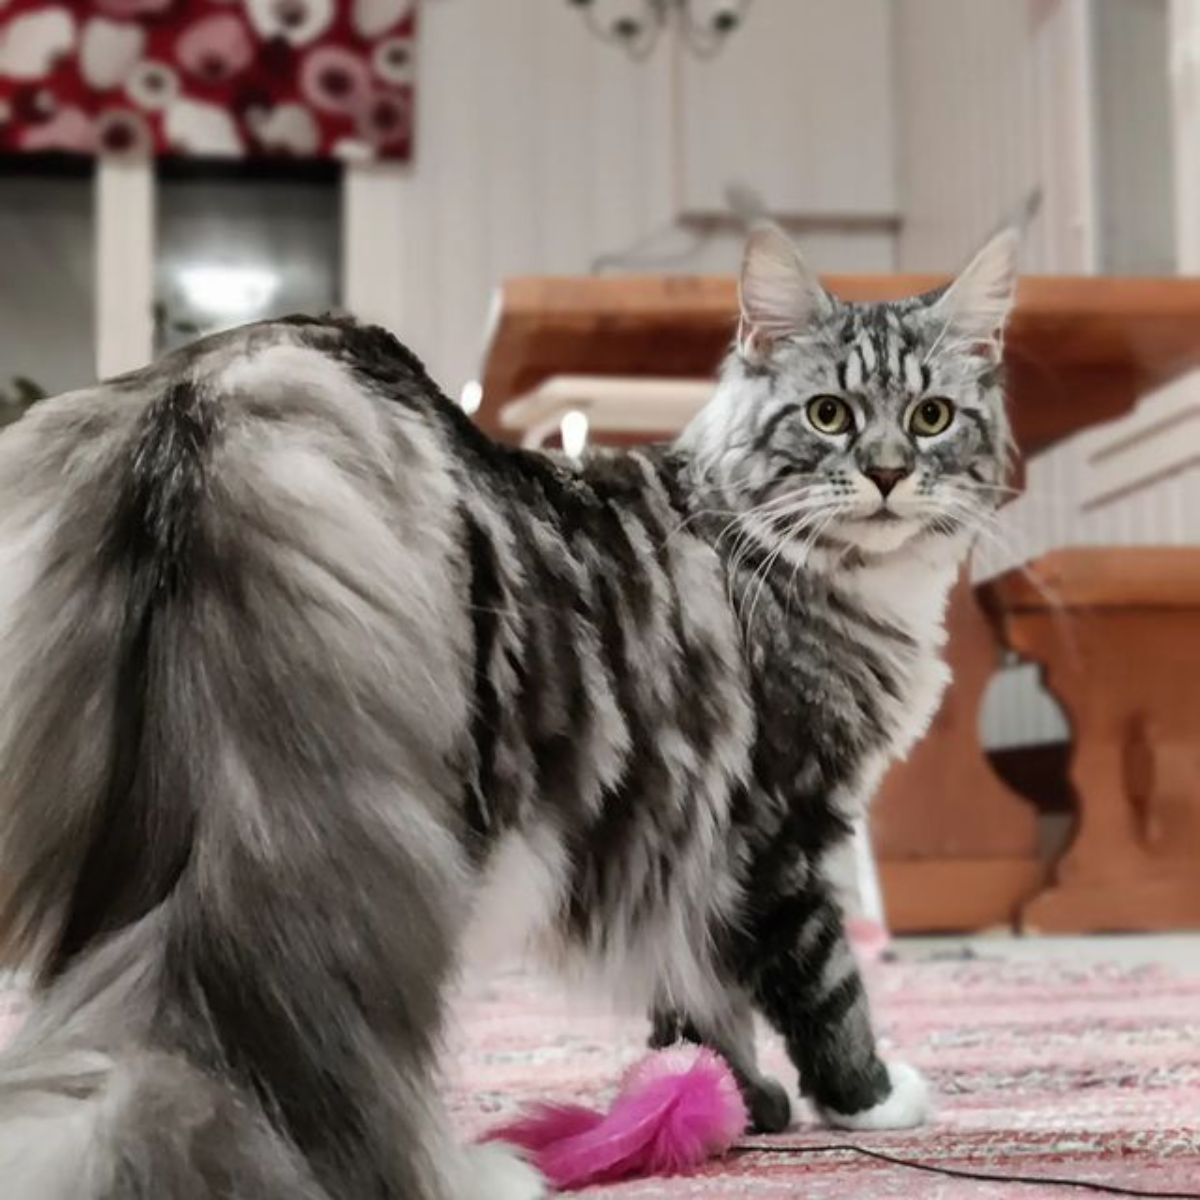 A silver tabby maine coon standing on a carpet near a cat toy.